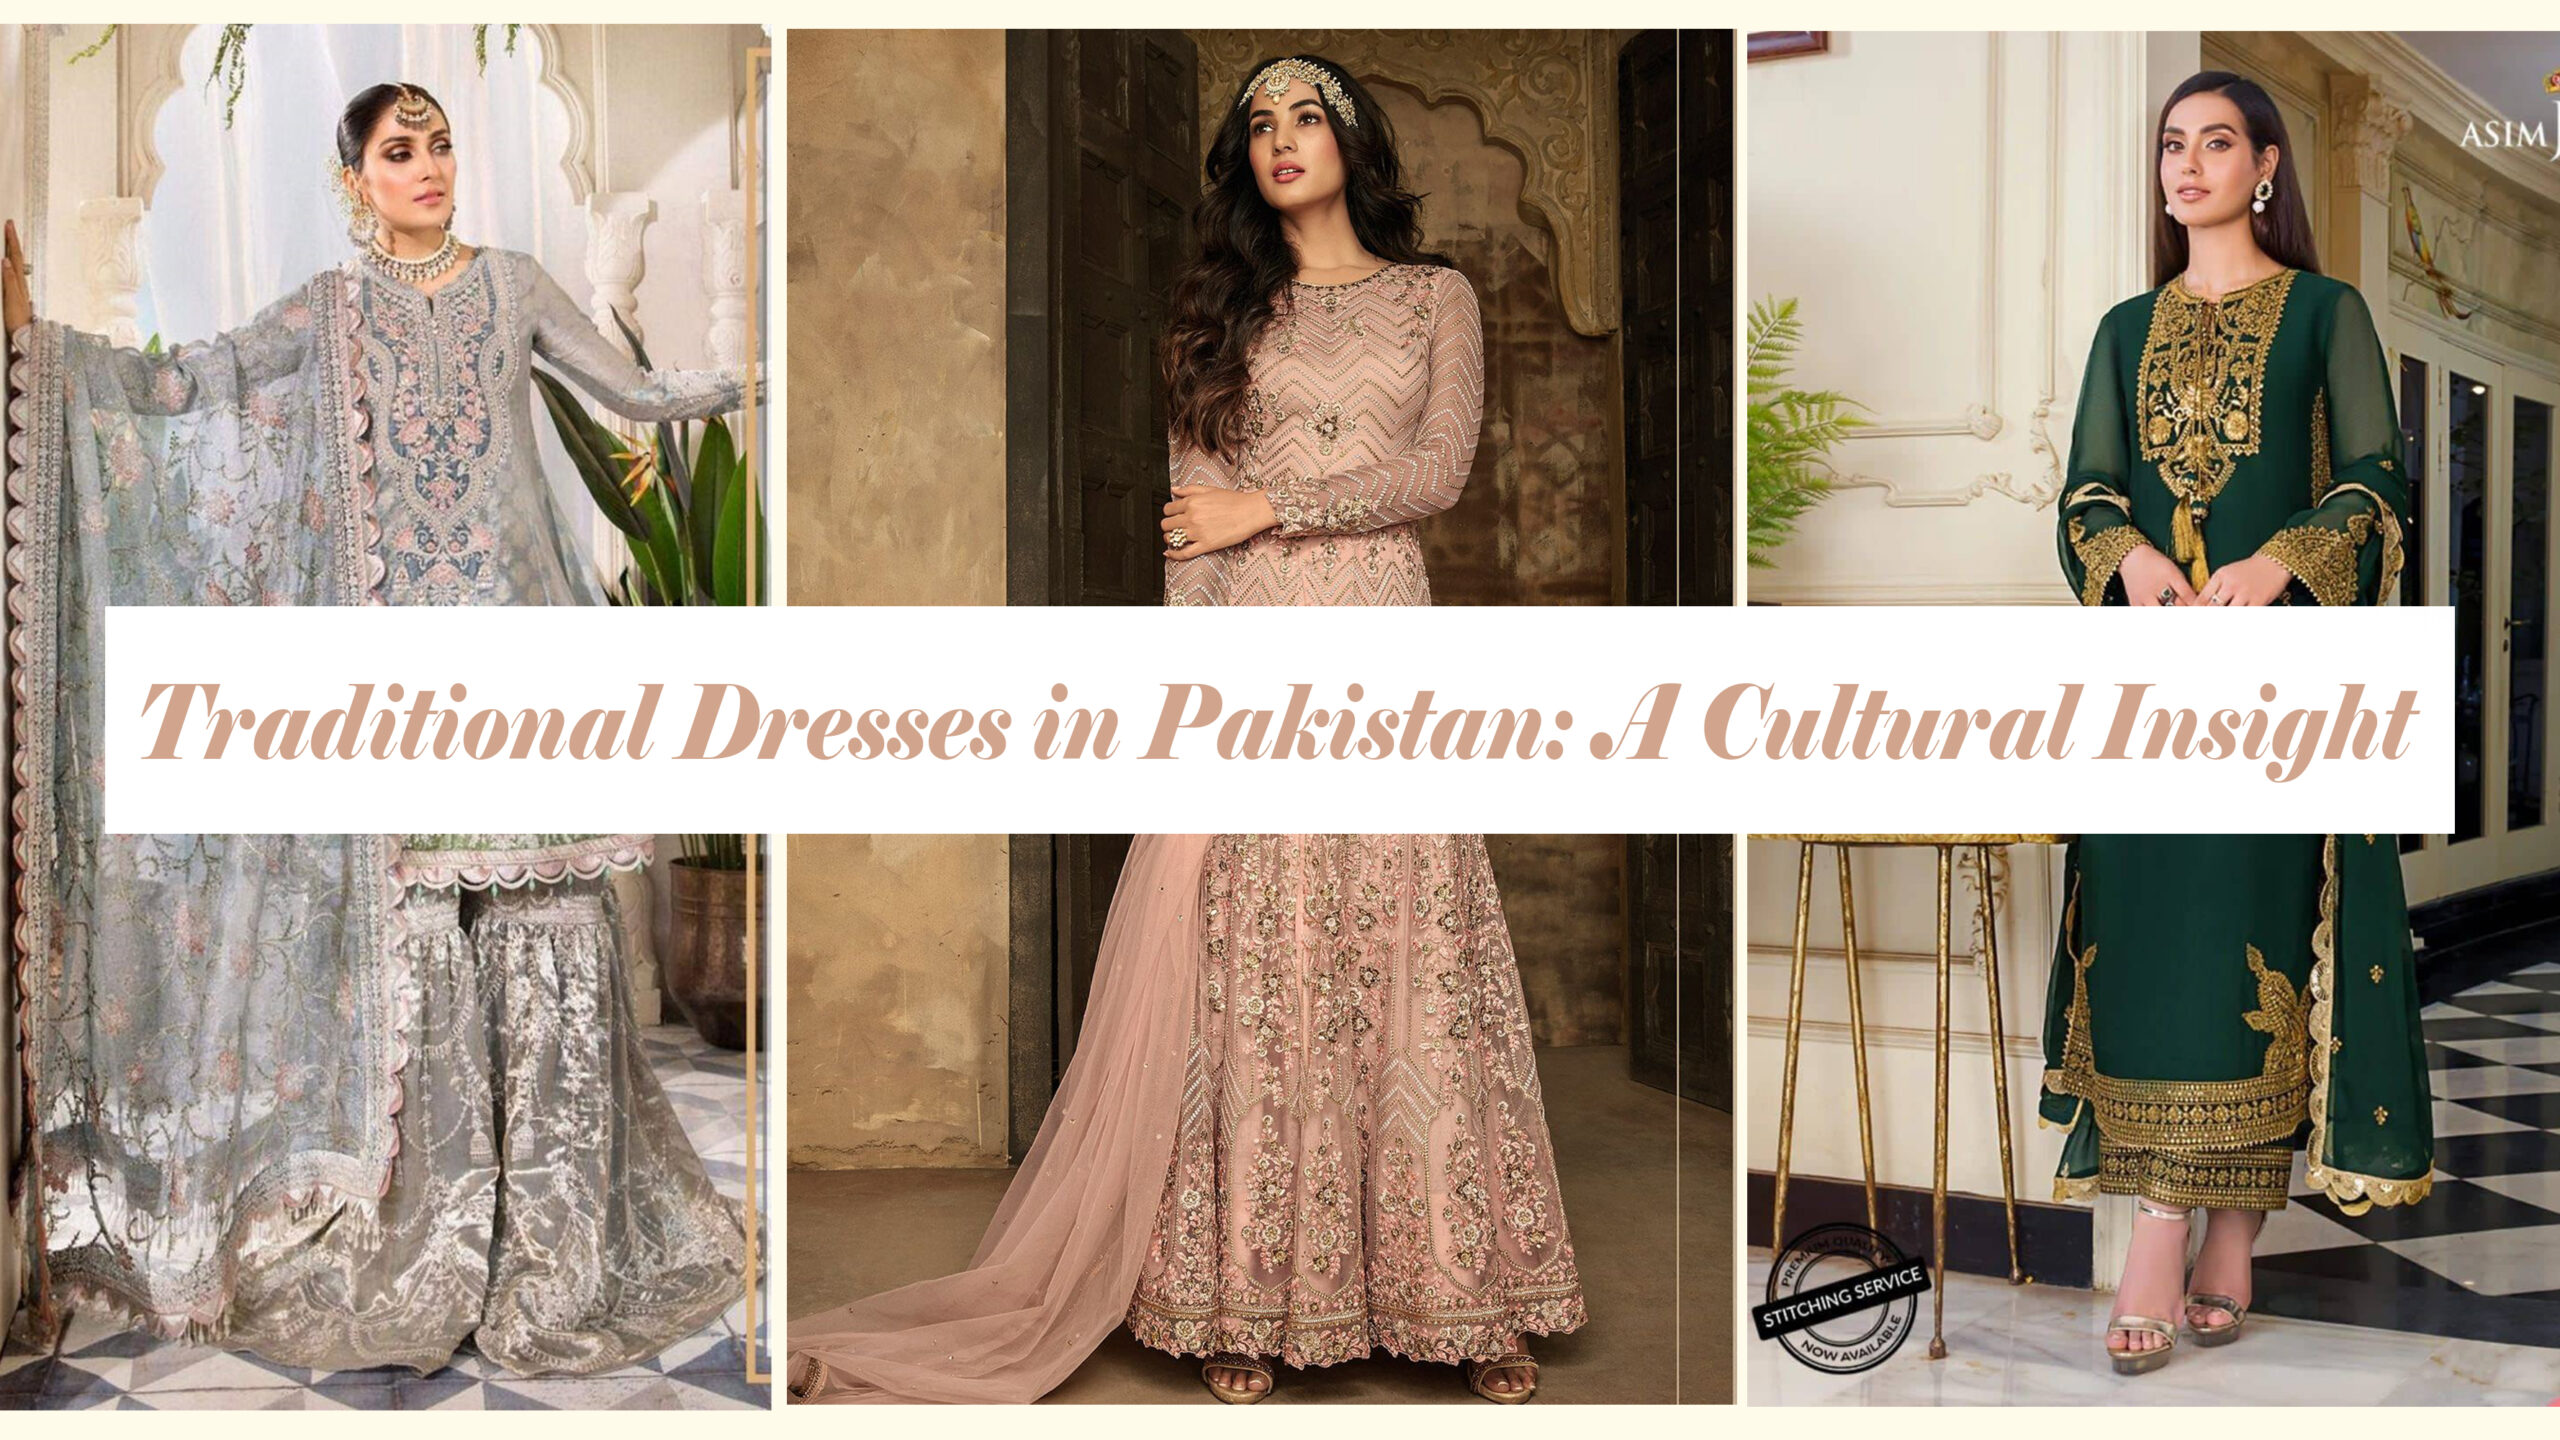 Traditional Dresses in Pakistan: A Cultural Insight